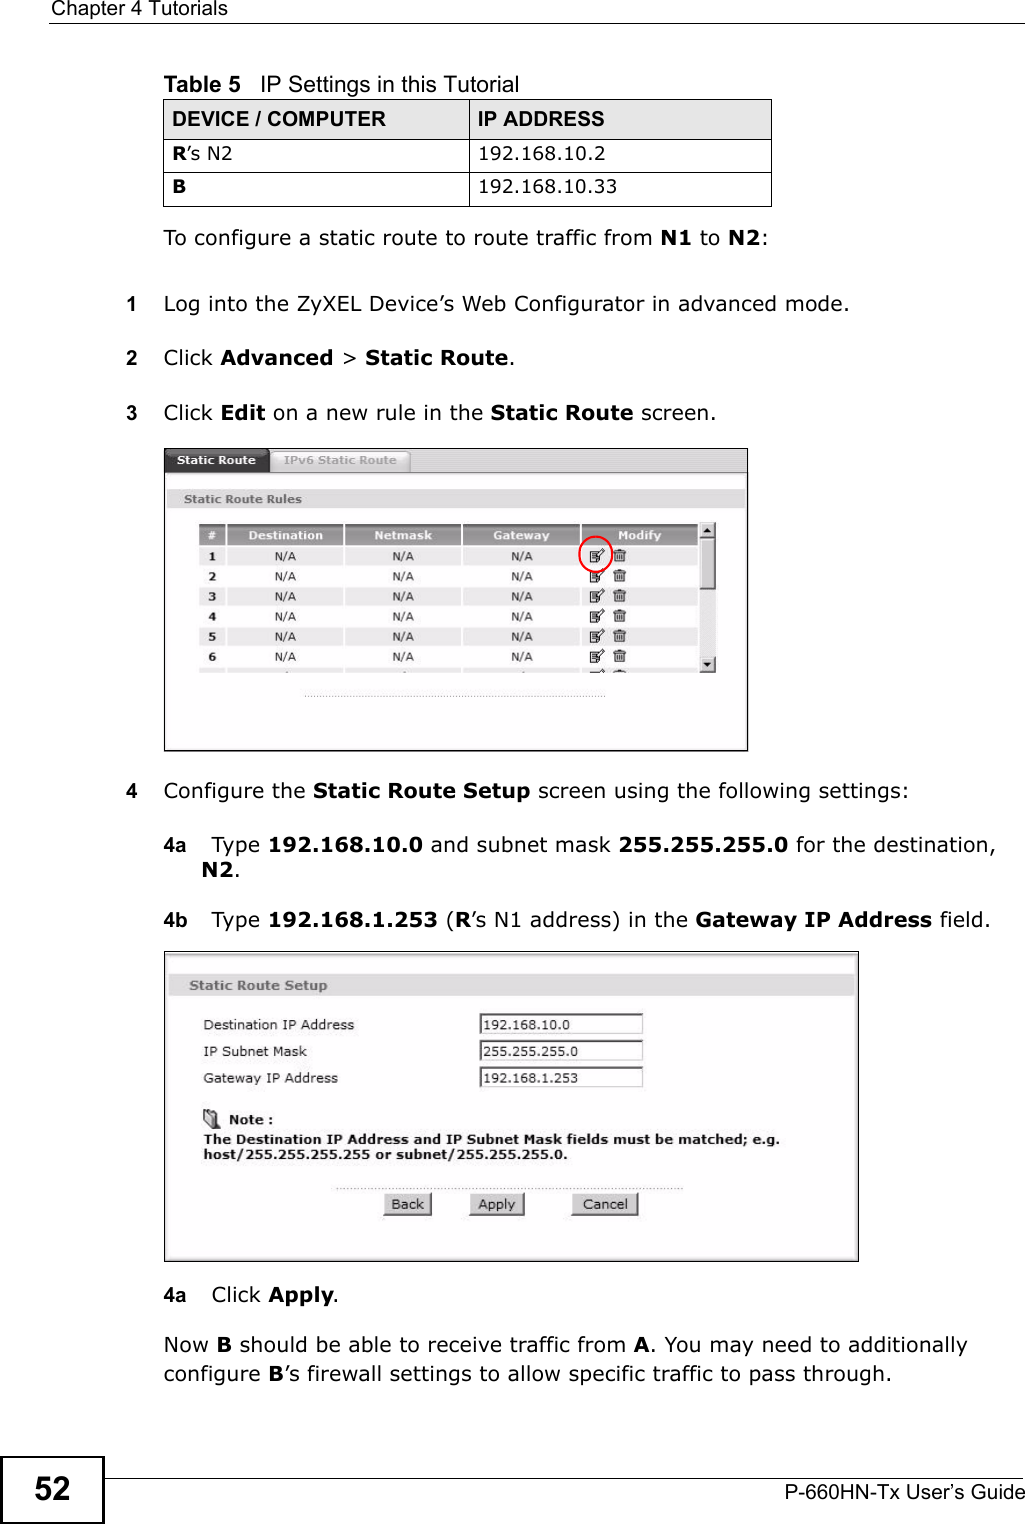 Chapter 4 TutorialsP-660HN-Tx User’s Guide52To configure a static route to route traffic from N1 to N2:1Log into the ZyXEL Device’s Web Configurator in advanced mode.2Click Advanced &gt; Static Route.3Click Edit on a new rule in the Static Route screen.4Configure the Static Route Setup screen using the following settings:4a Type 192.168.10.0 and subnet mask 255.255.255.0 for the destination, N2.4b Type 192.168.1.253 (R’s N1 address) in the Gateway IP Address field.4a Click Apply.Now B should be able to receive traffic from A. You may need to additionally configure B’s firewall settings to allow specific traffic to pass through.R’s N2  192.168.10.2B192.168.10.33Table 5   IP Settings in this TutorialDEVICE / COMPUTER IP ADDRESS